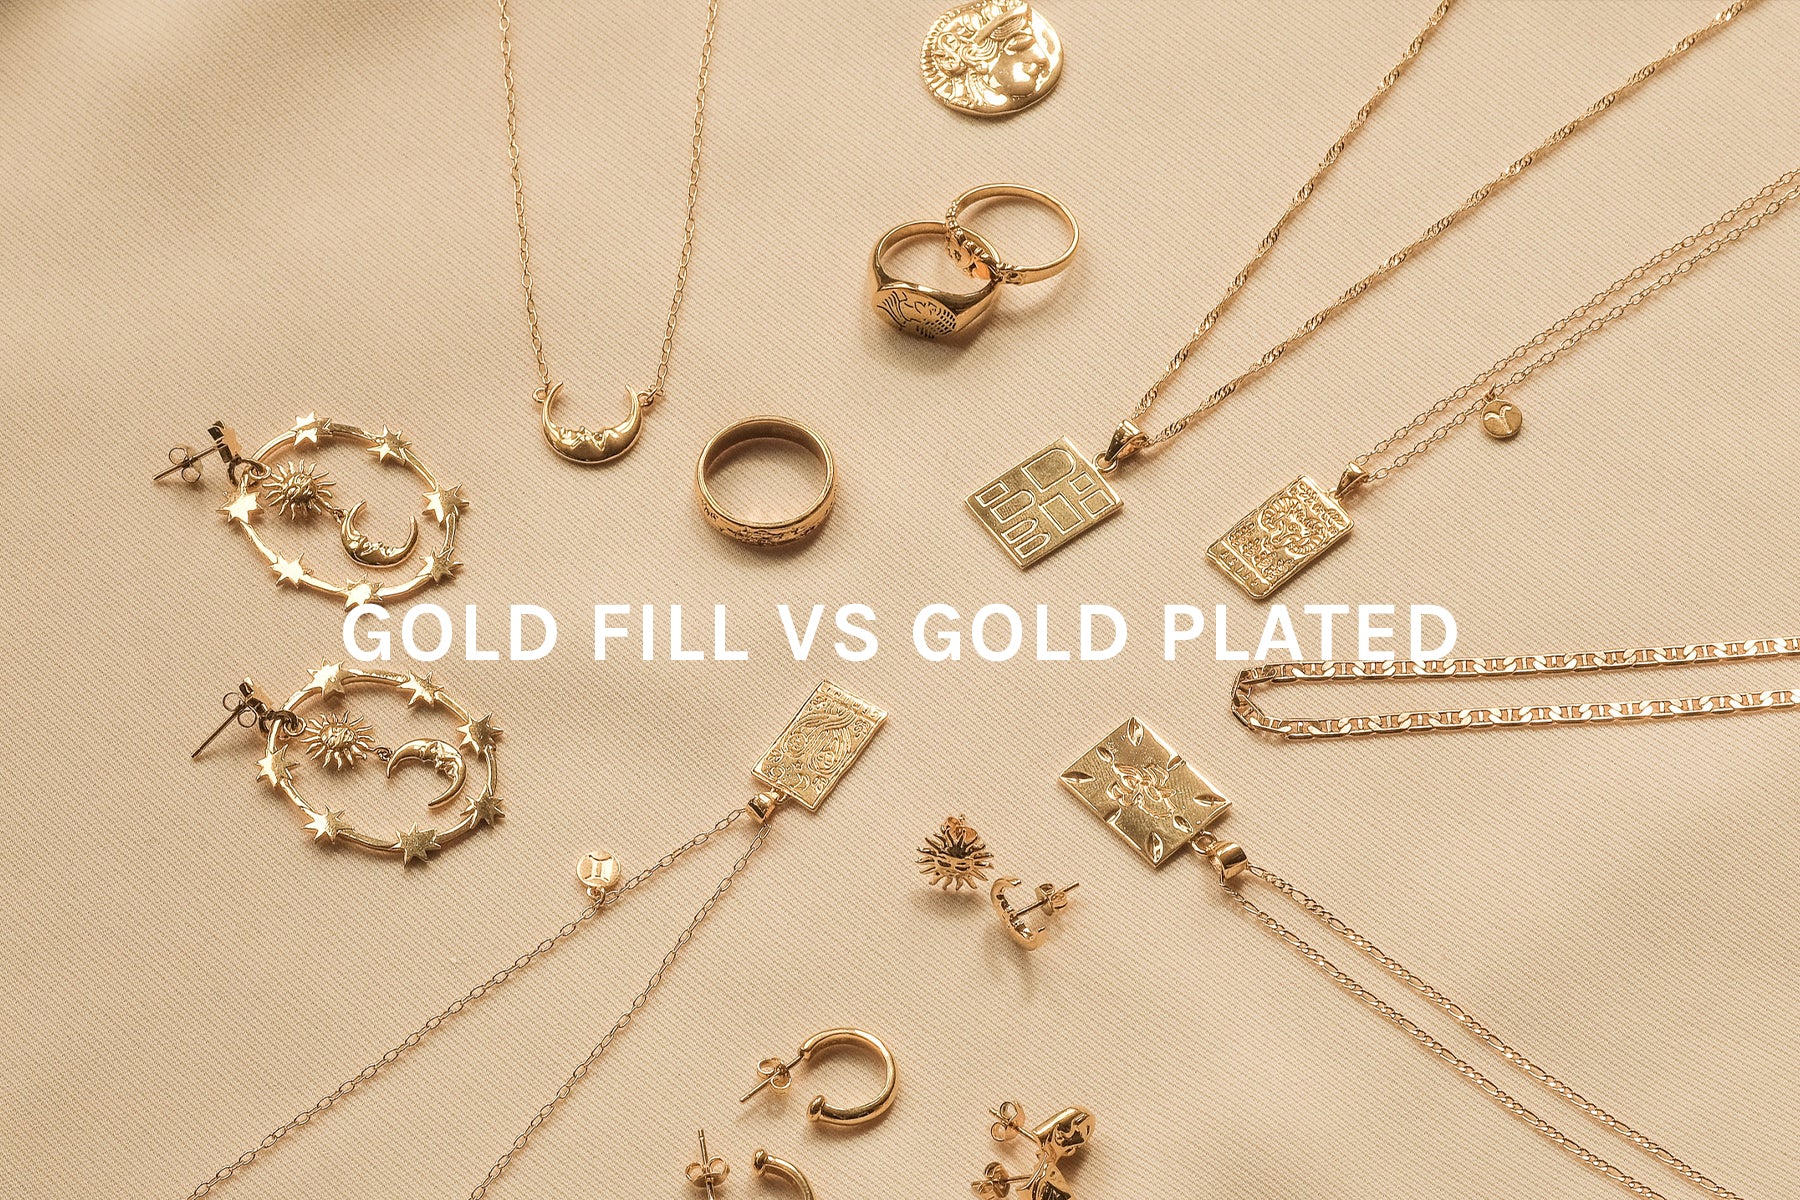 Gold Filled vs. Gold Plated